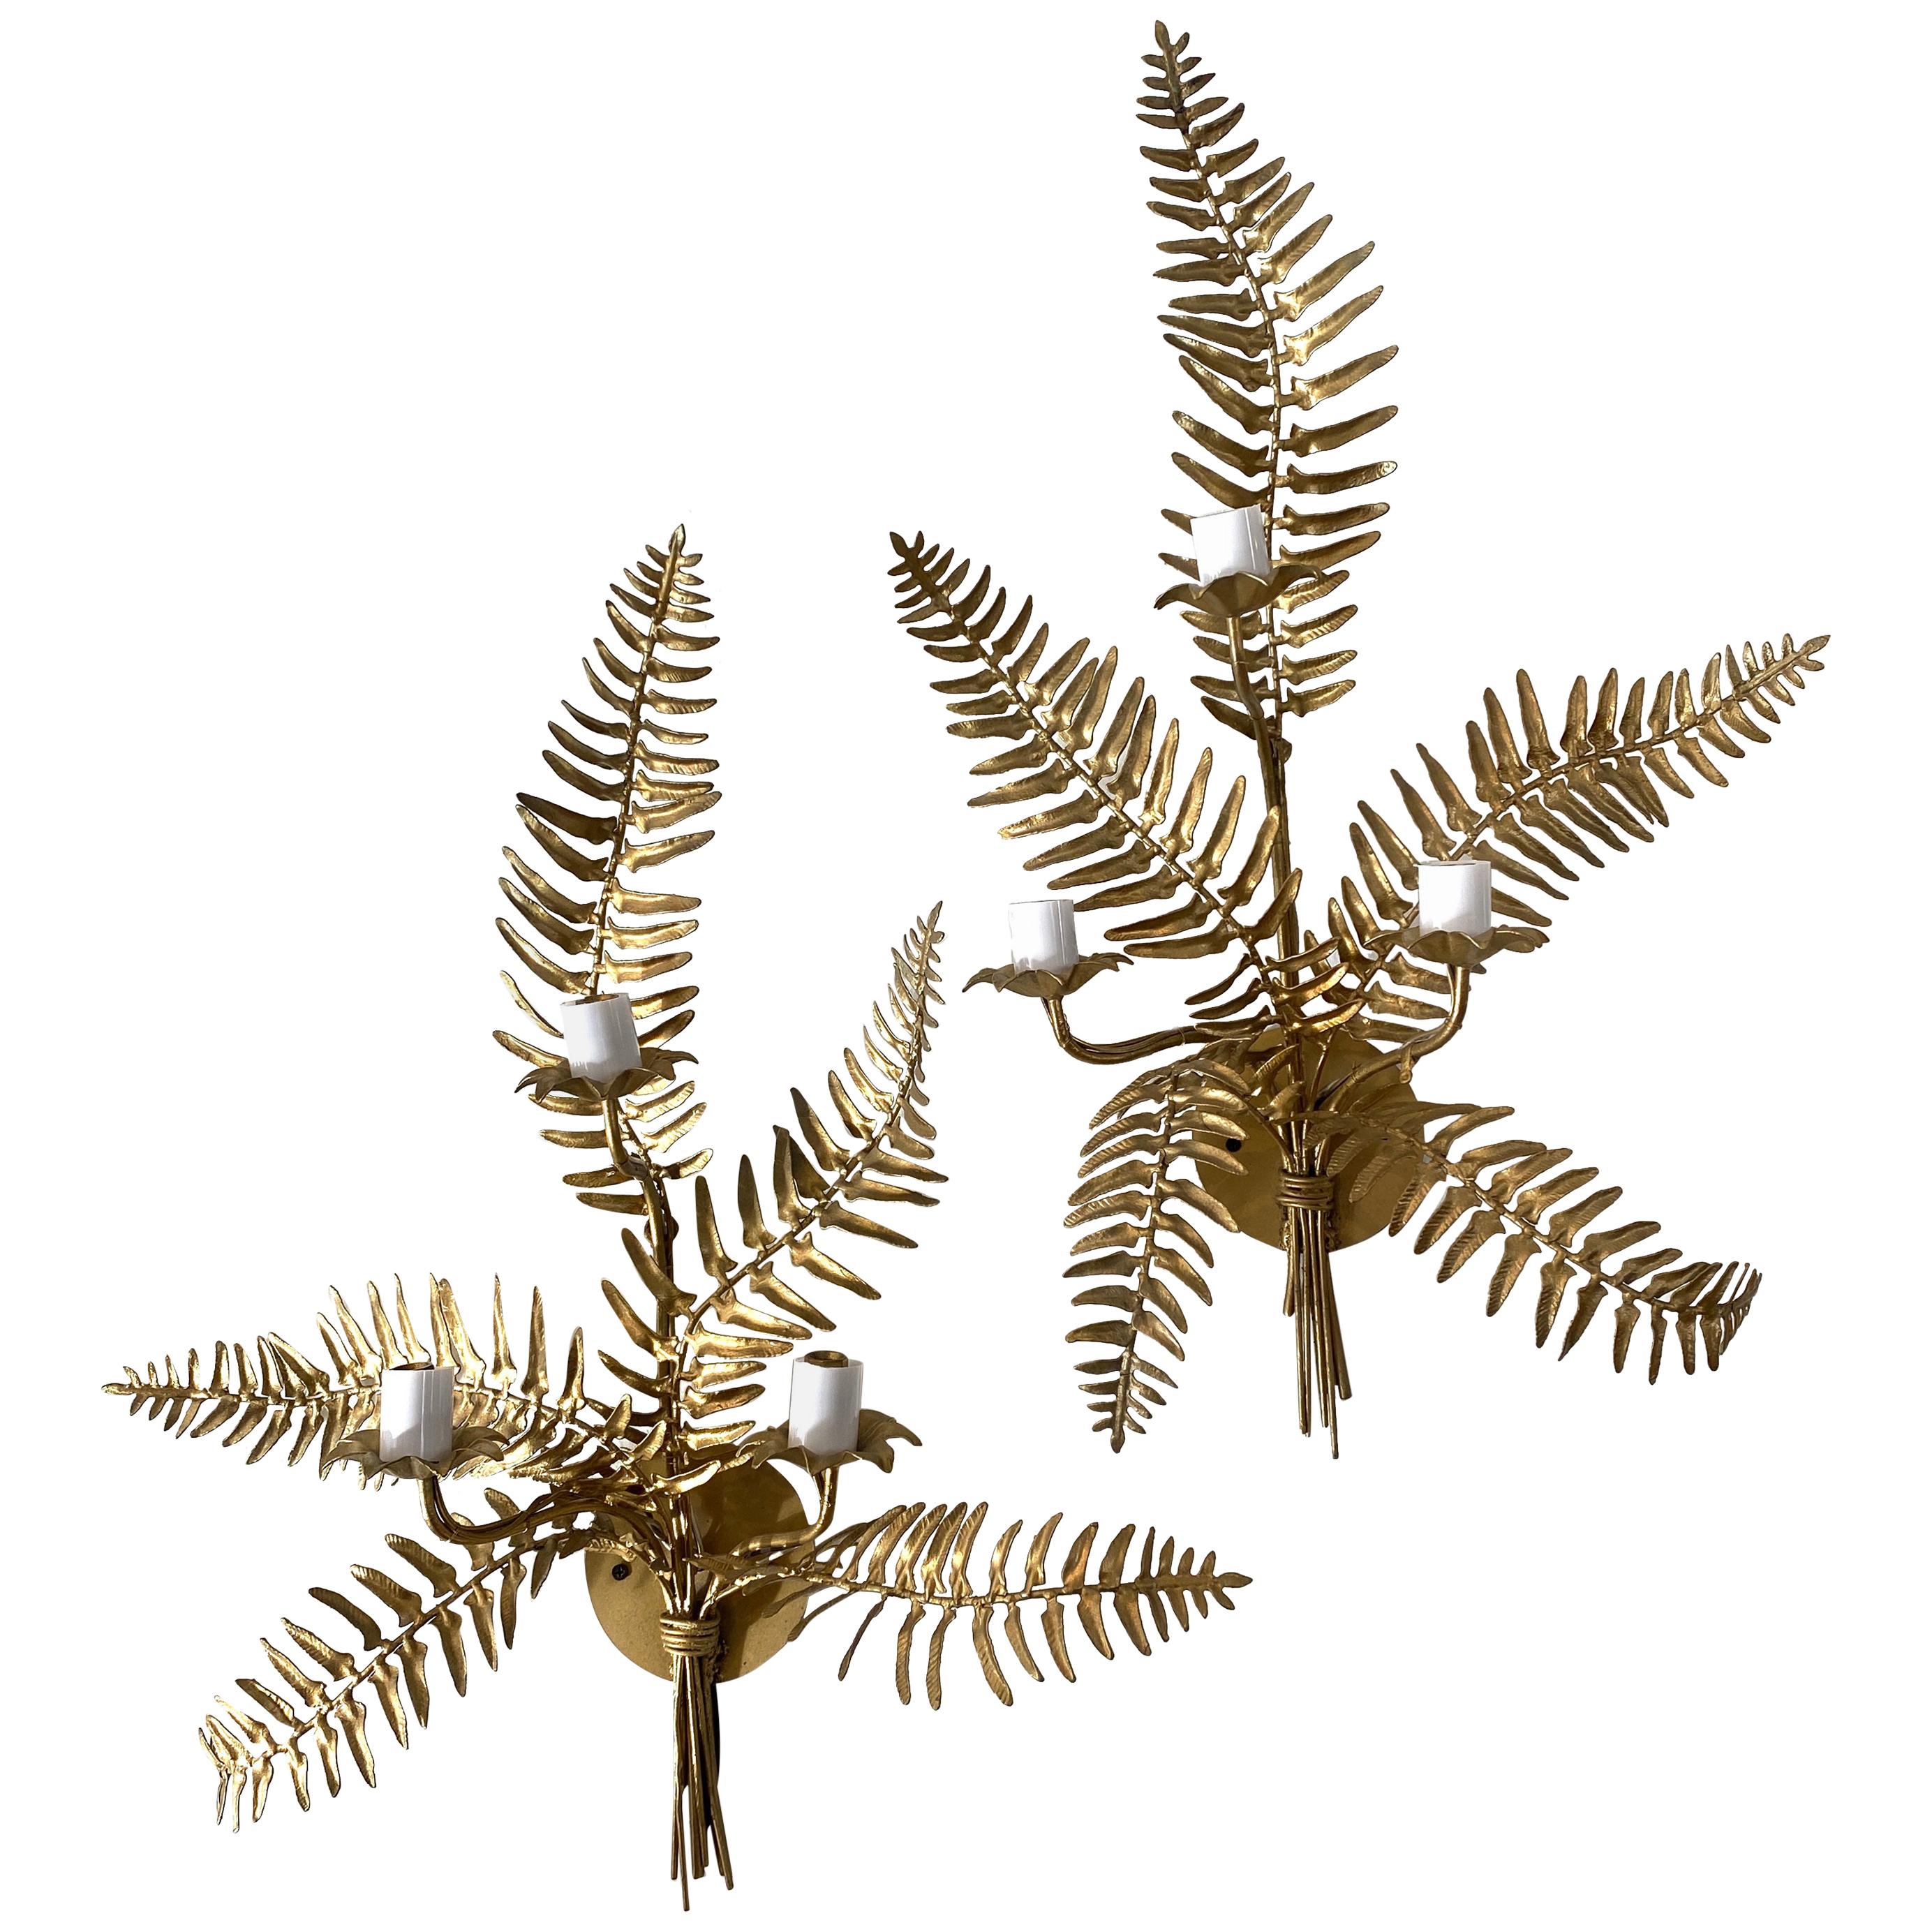 Pair of Fern Form Wall Sconces